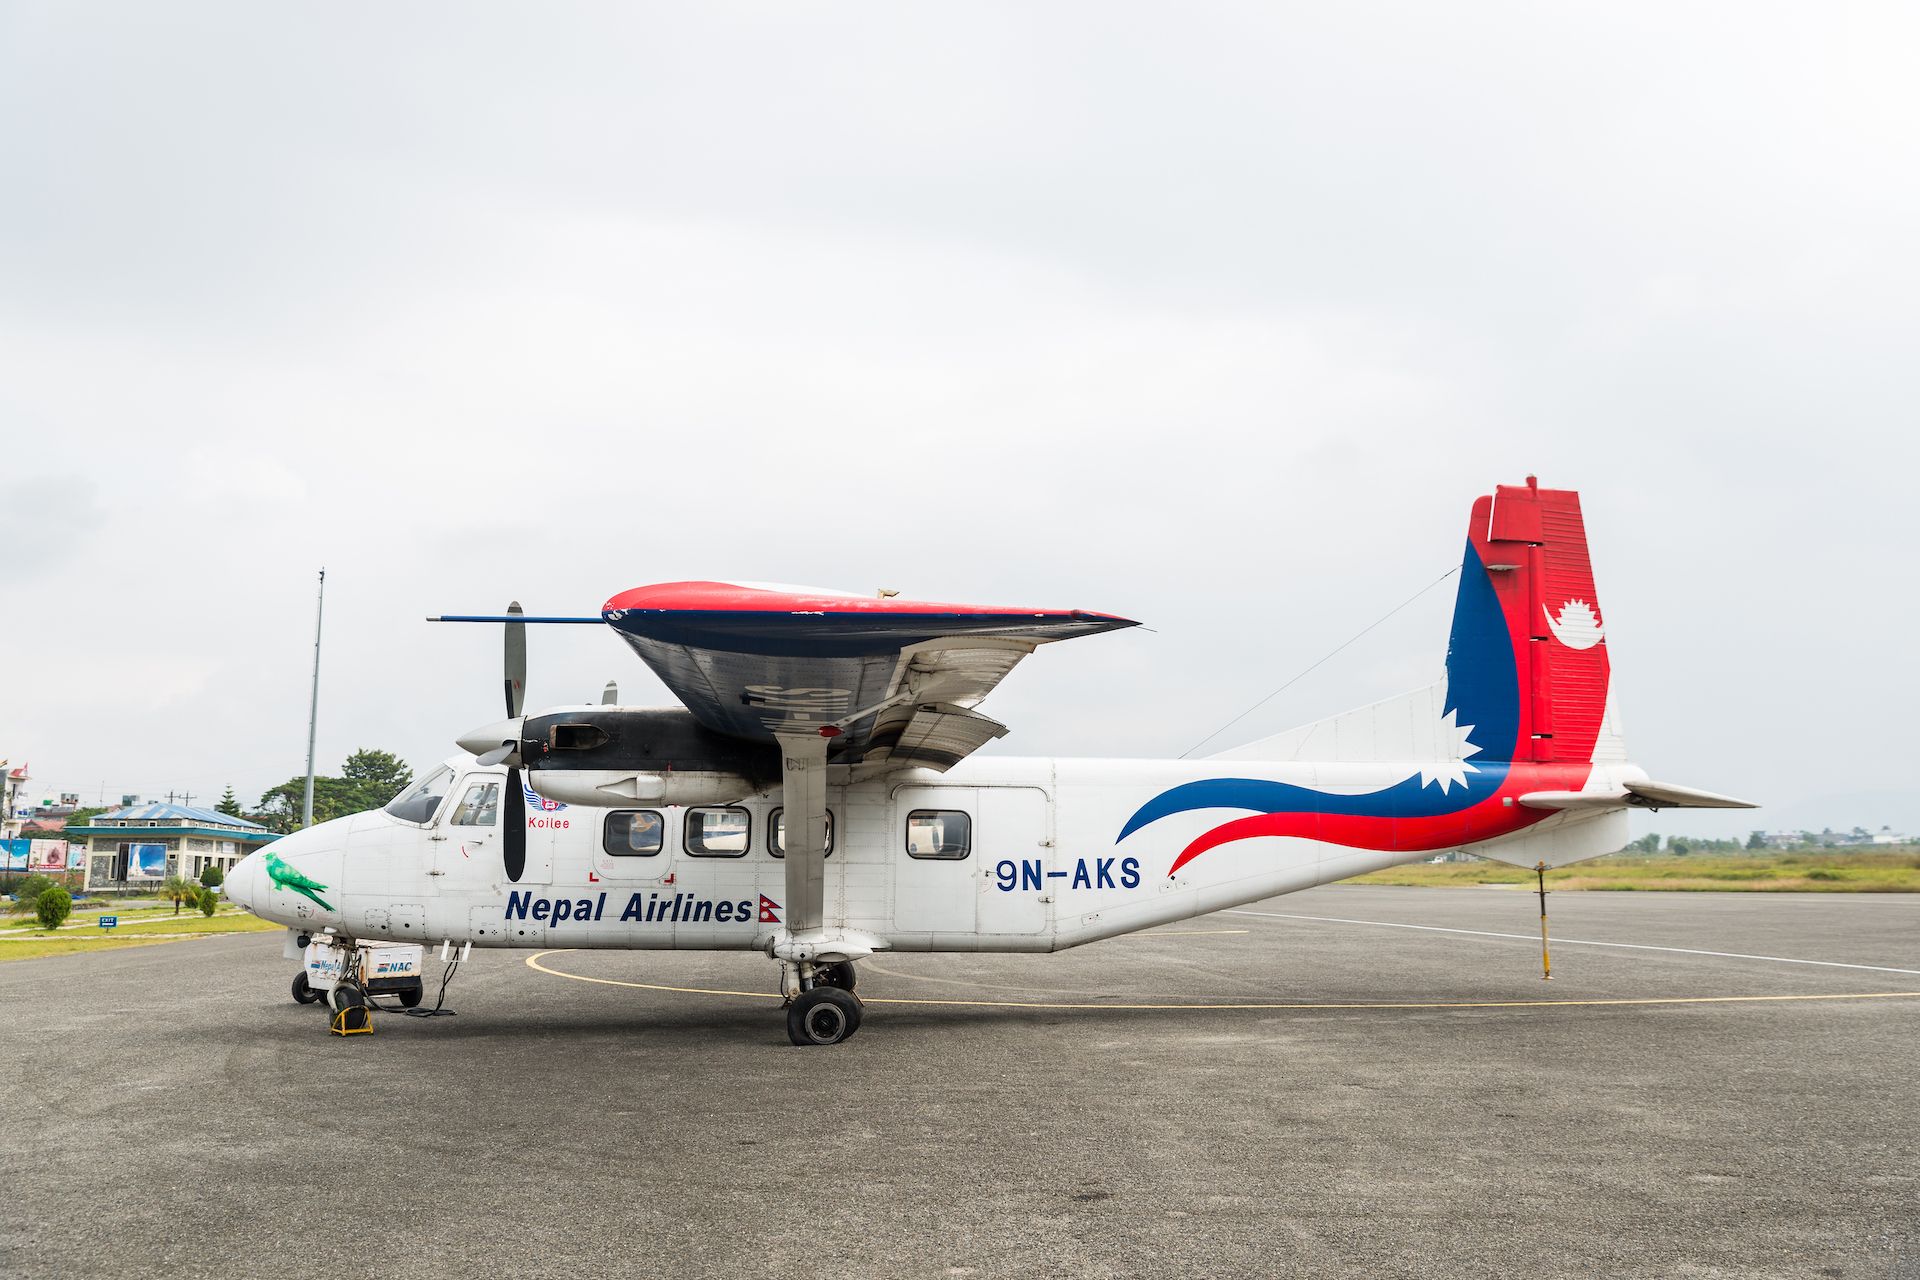 A Nepal Airlines Harbin Y-12 E aircraft